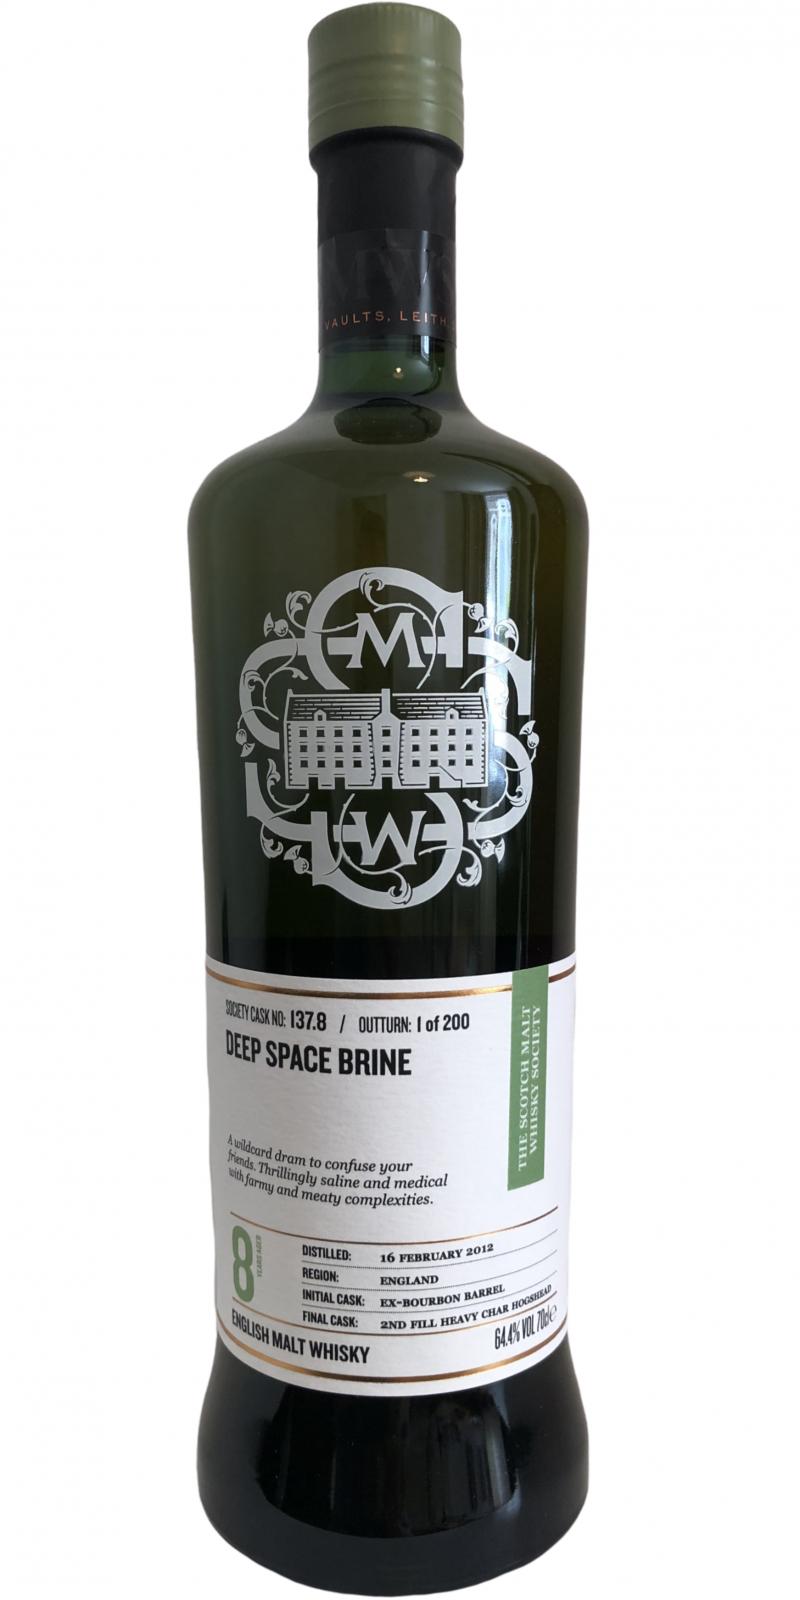 The English Whisky 2012 SMWS 137.8